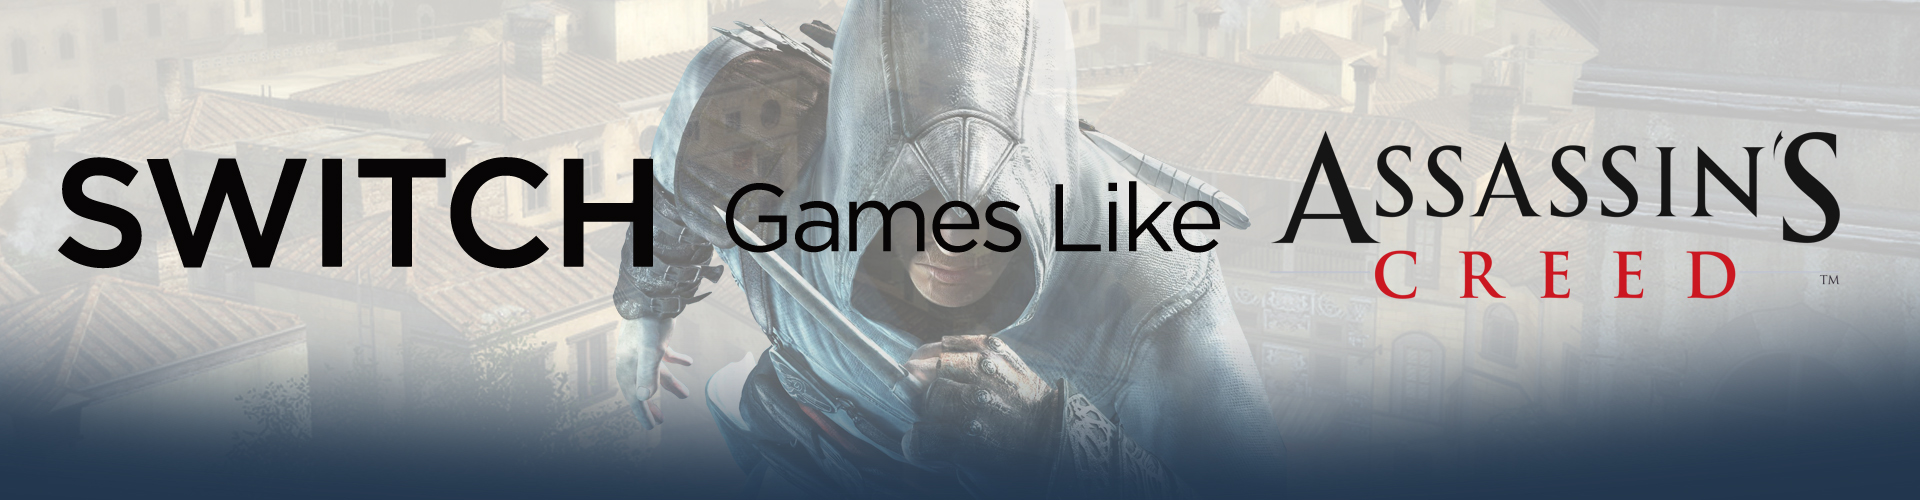 Switch Games like Assassin's Creed